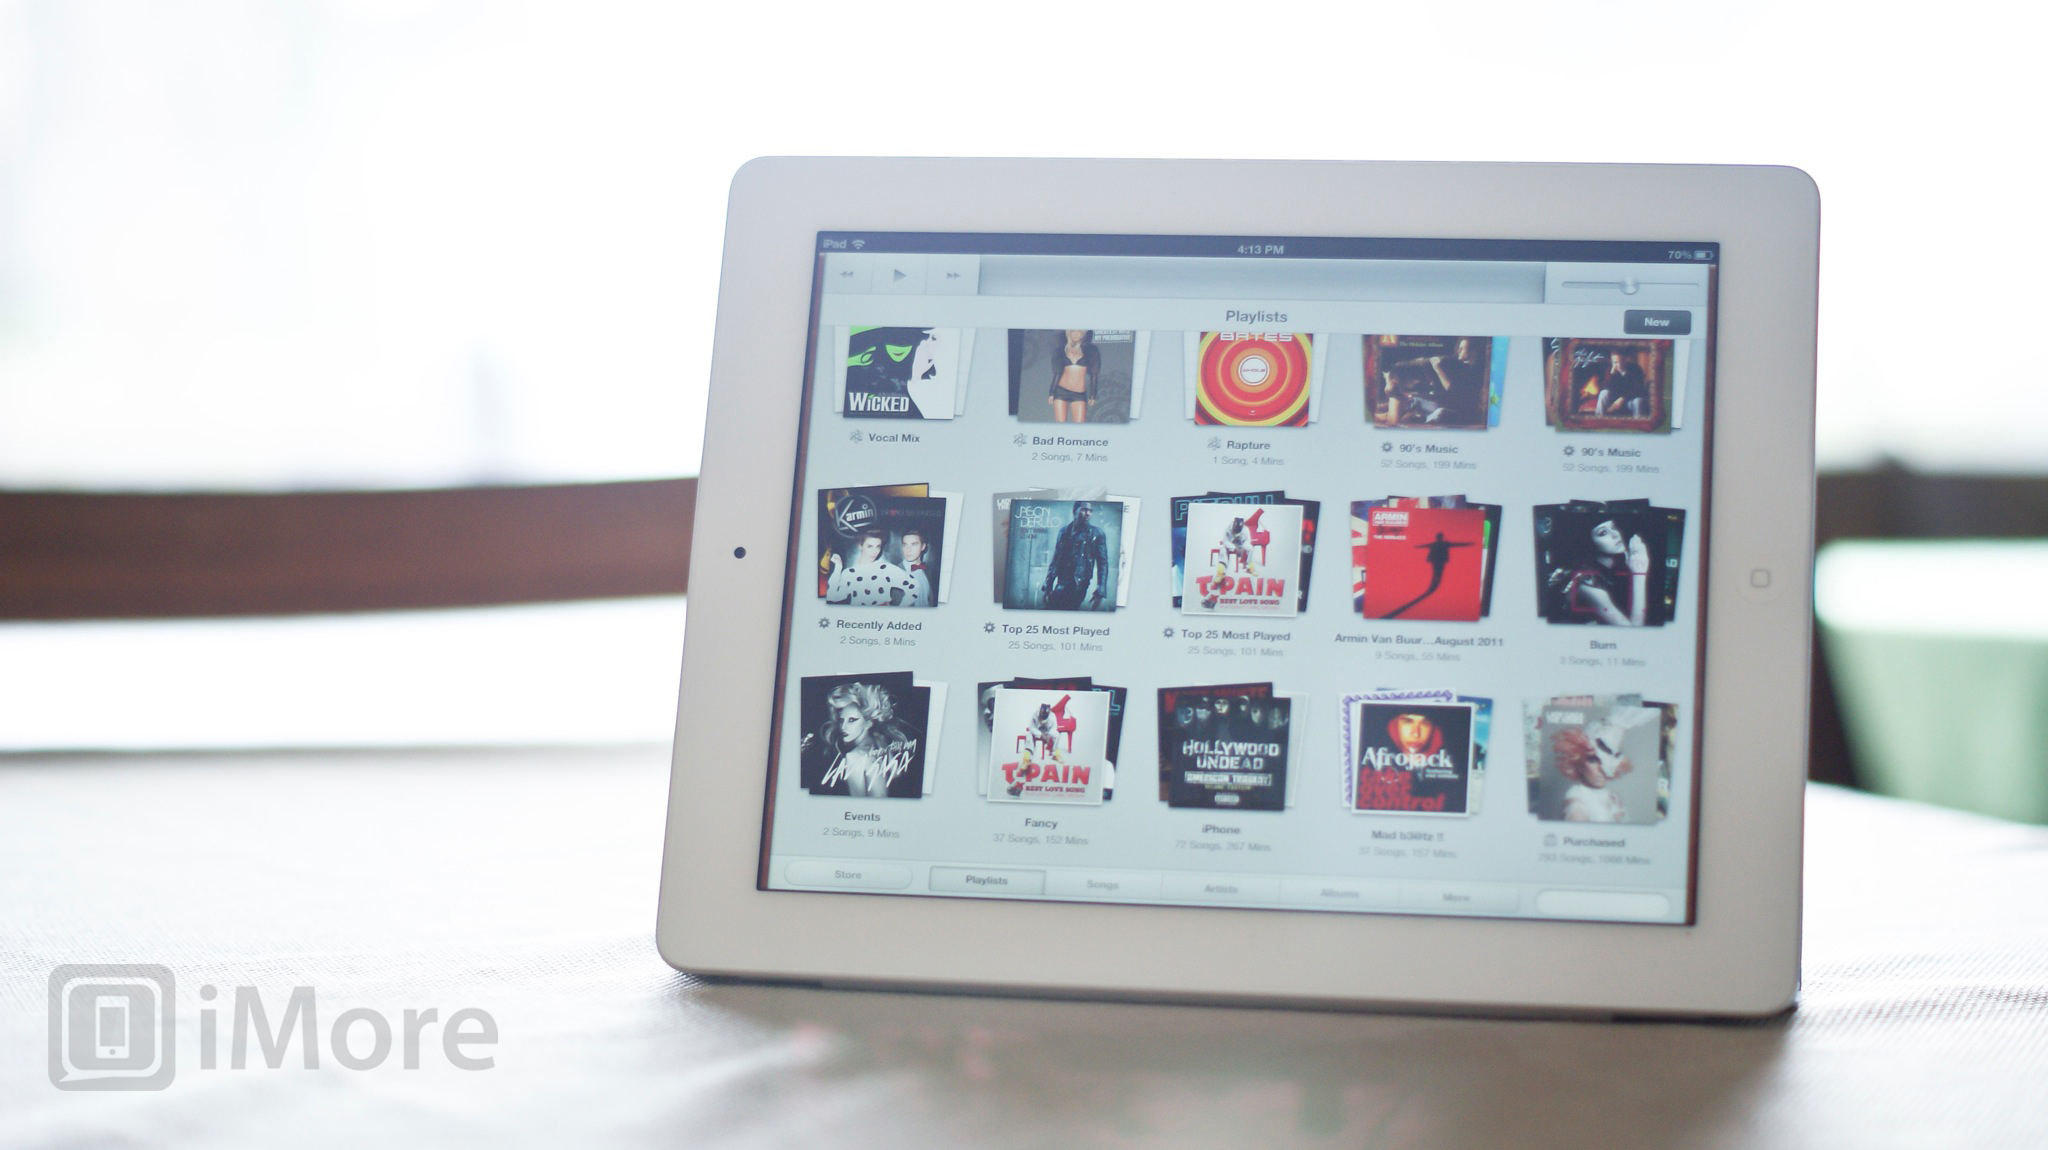 How to create playlists of songs and albums on your new iPad